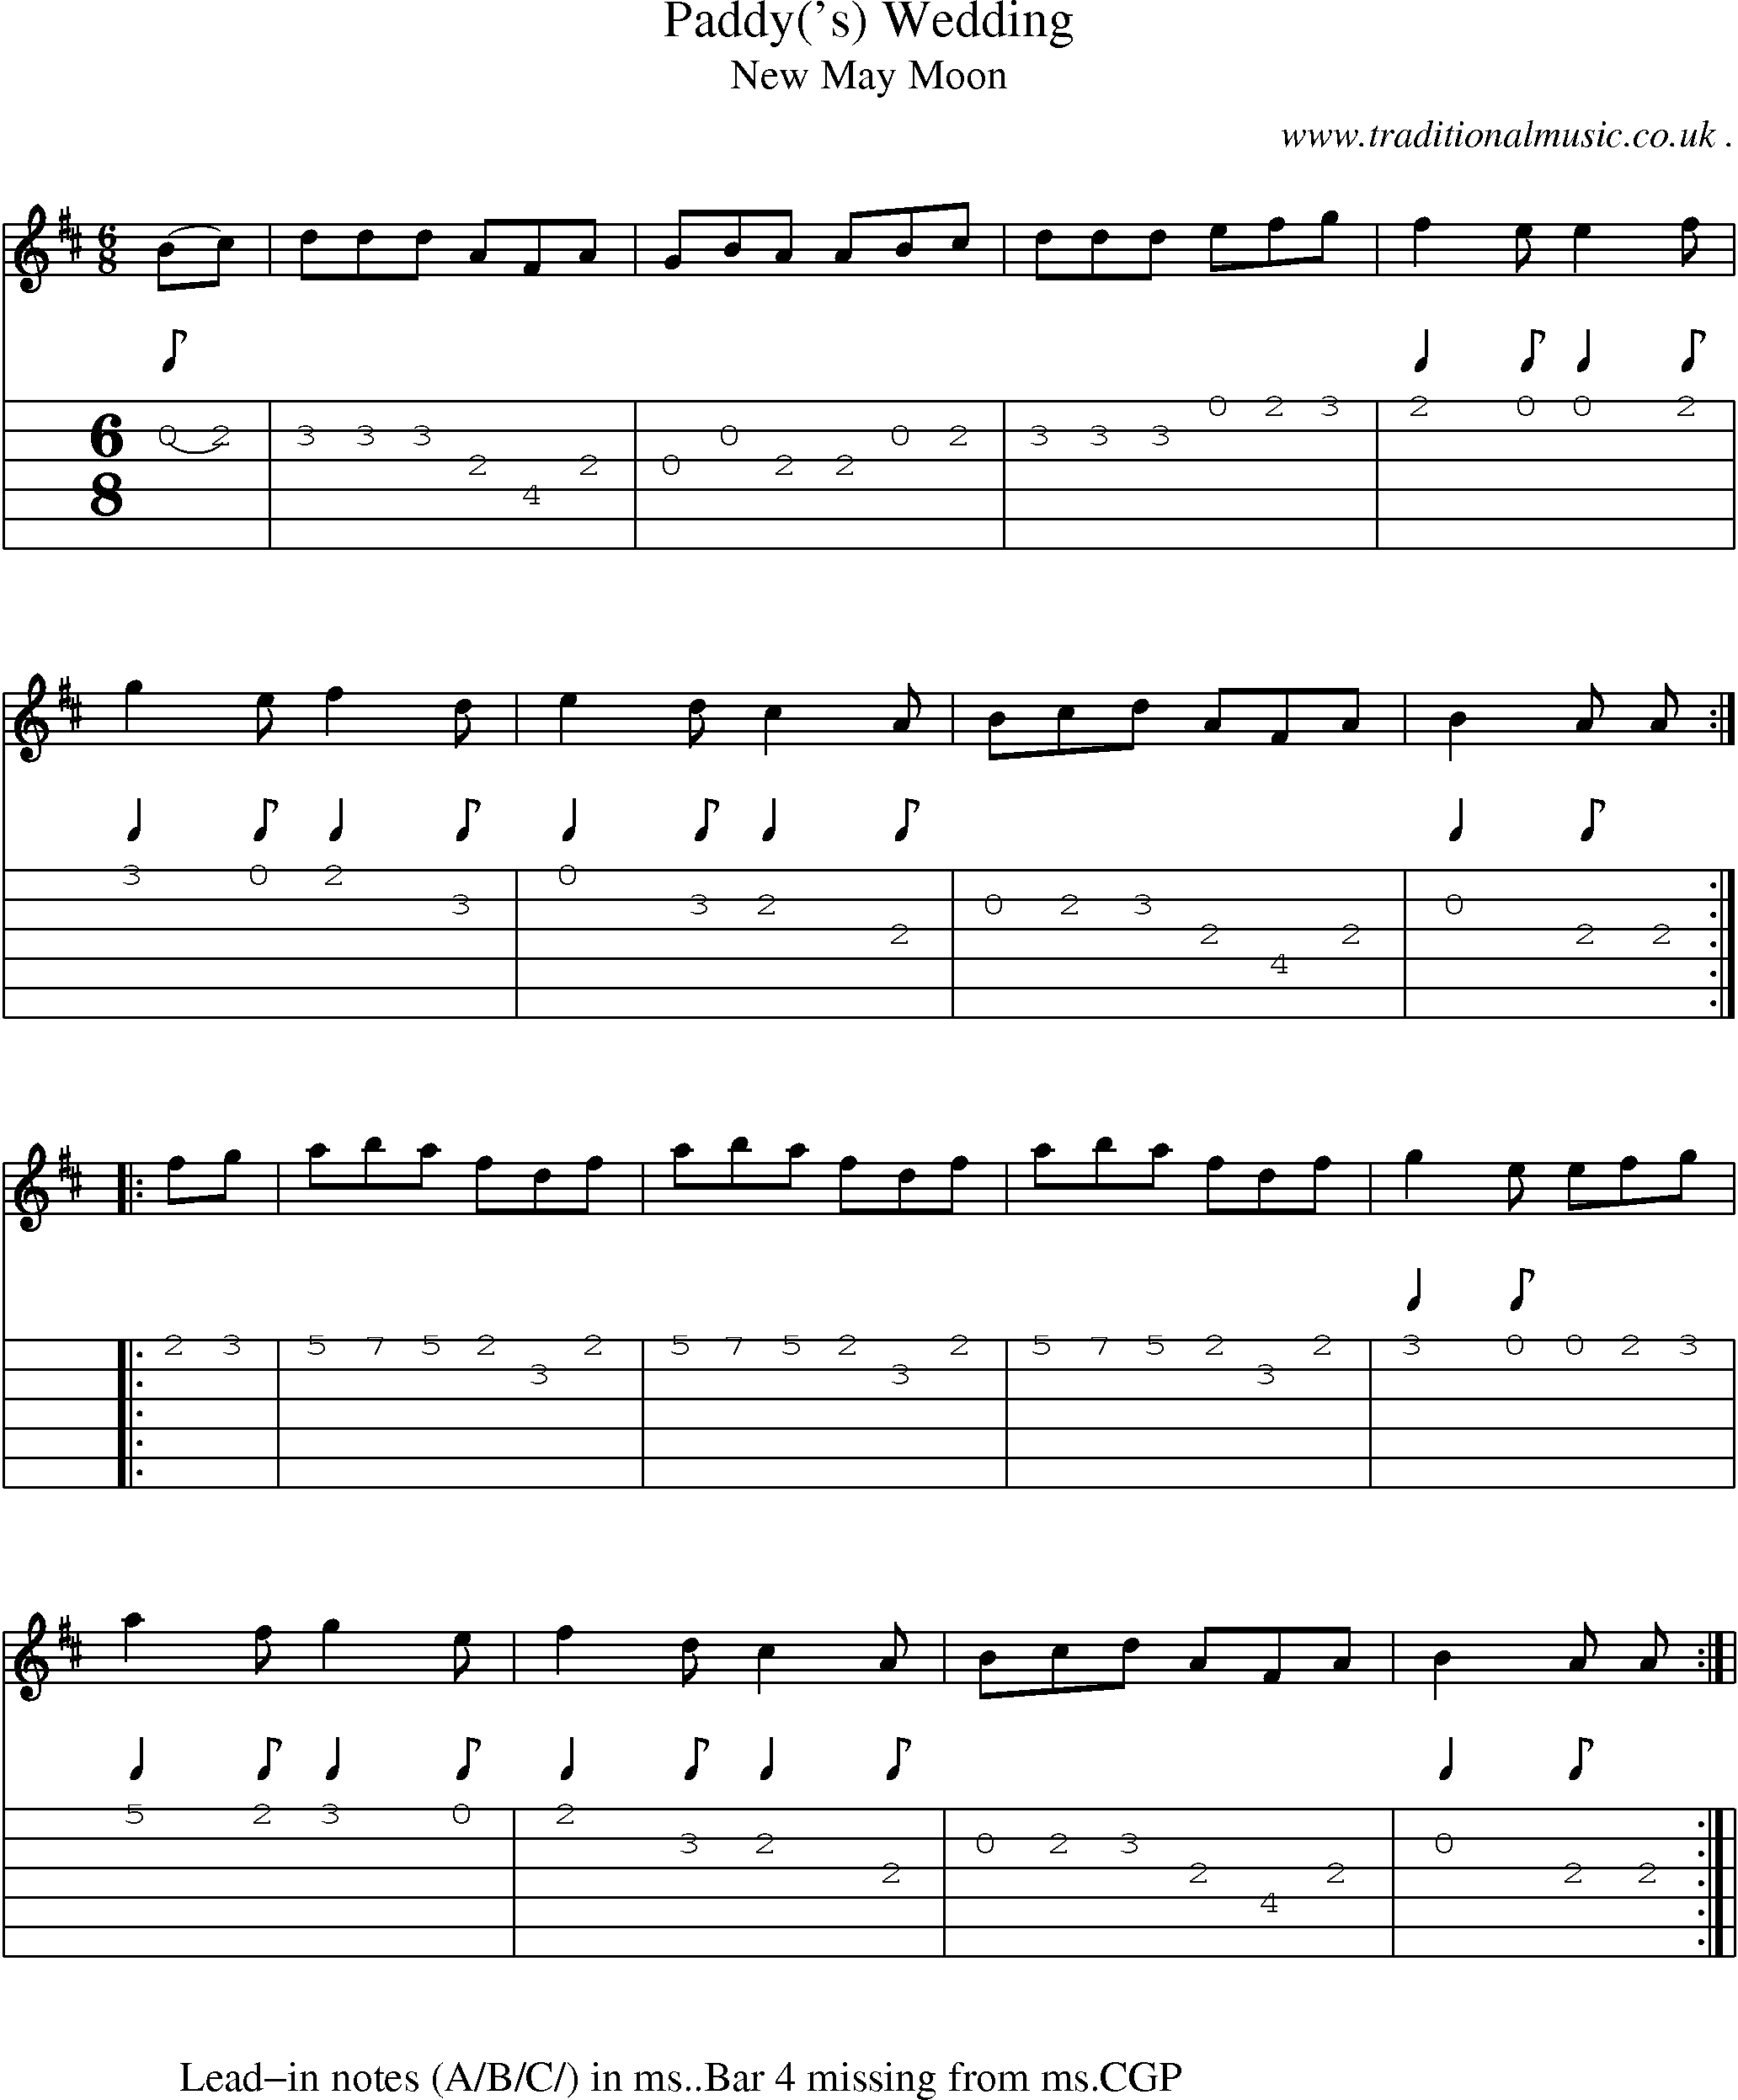 Sheet-Music and Guitar Tabs for Paddy(s) Wedding